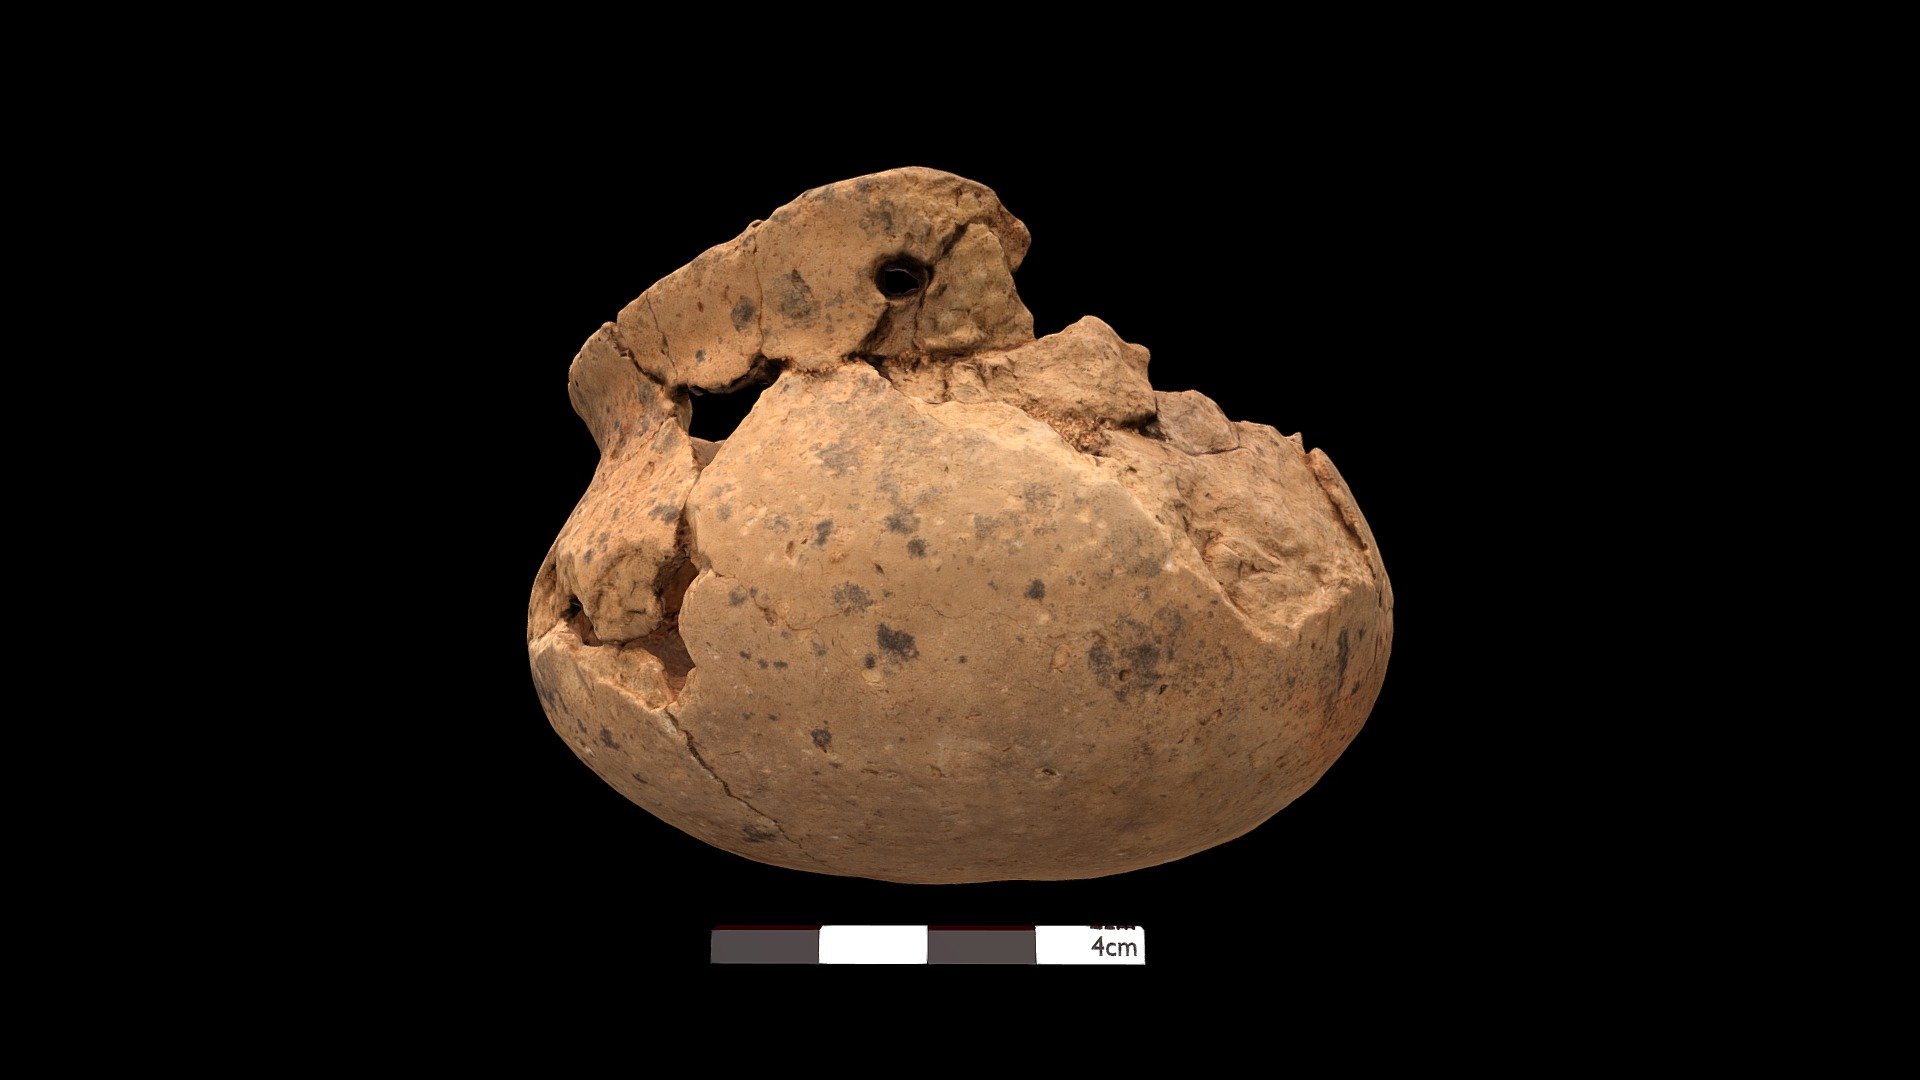 Ceramic Vessel from the Tremaine Site, Wisconsin